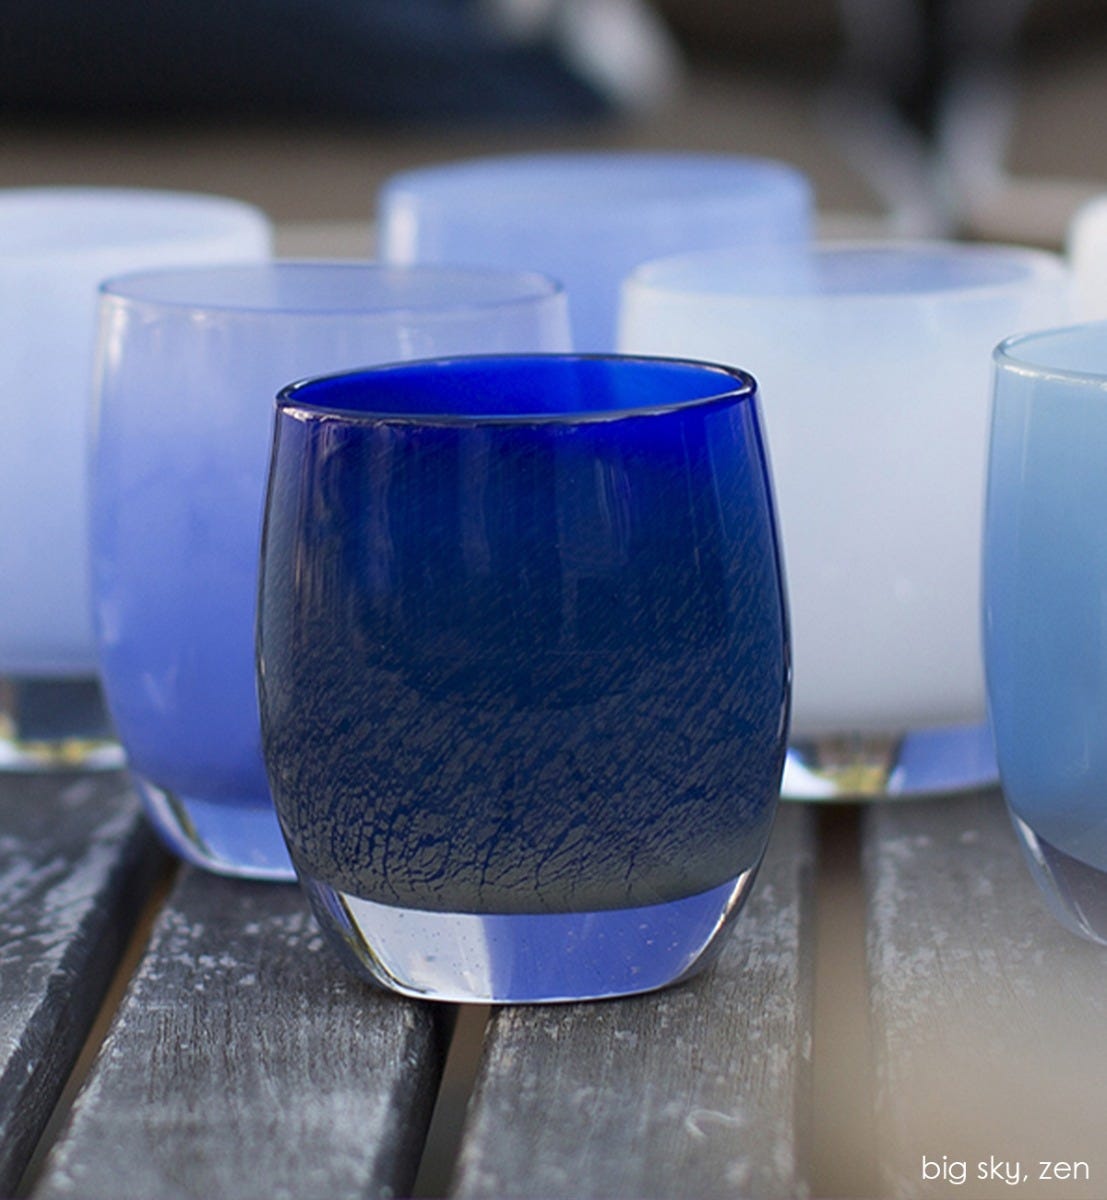 zen, midnight blue textured, hand-blown glass votive candle holder. Paired with big sky.